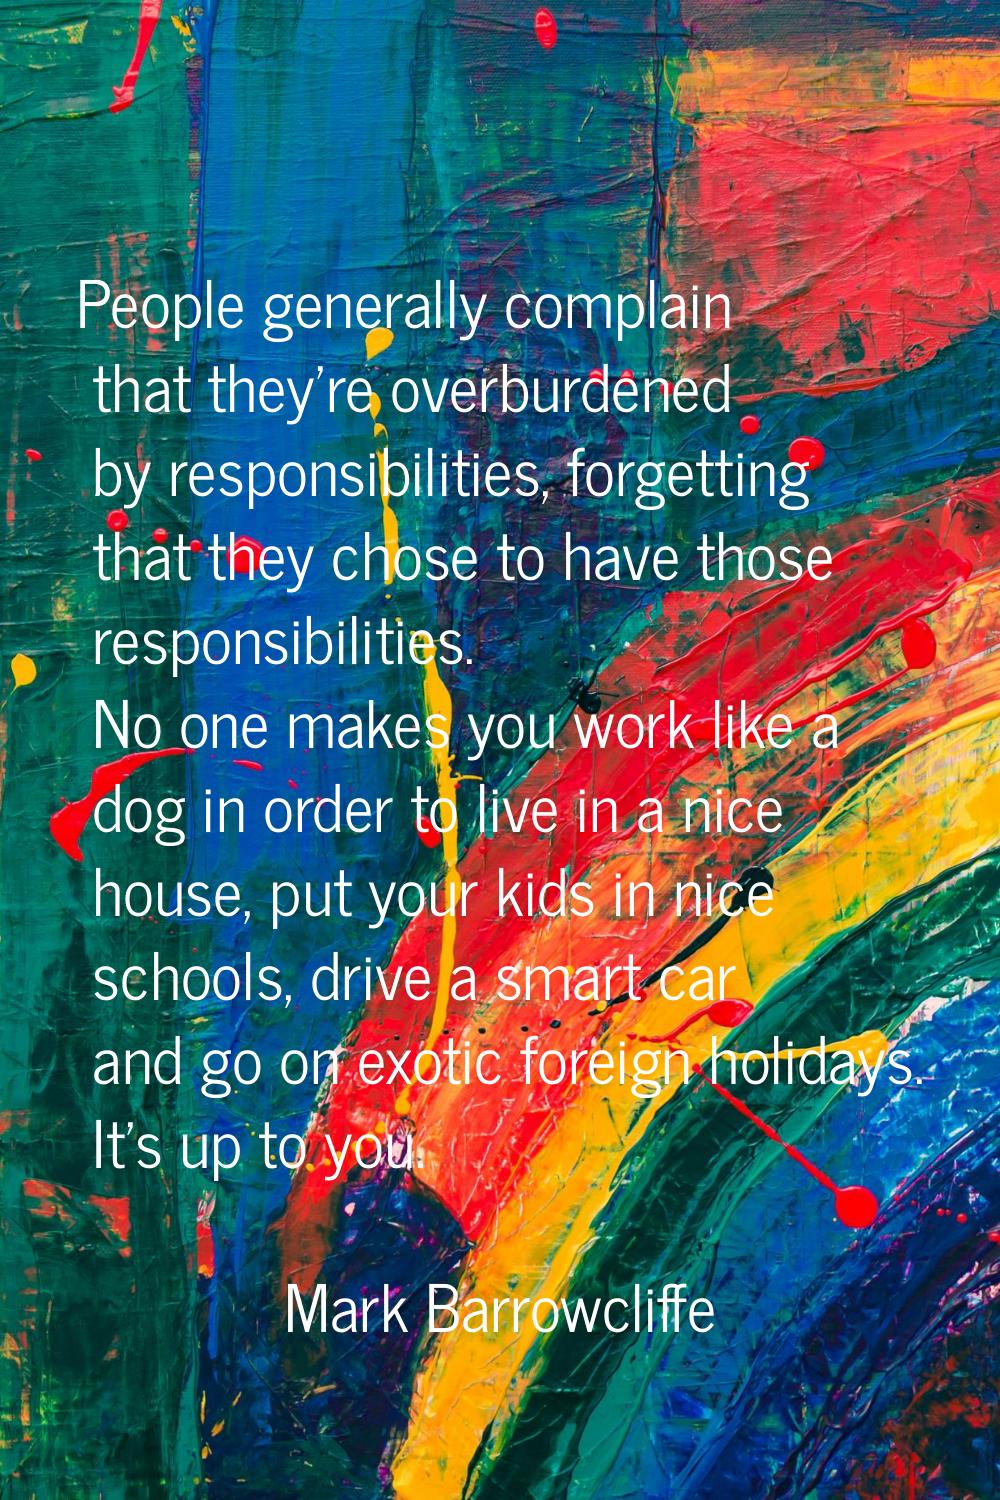 People generally complain that they're overburdened by responsibilities, forgetting that they chose